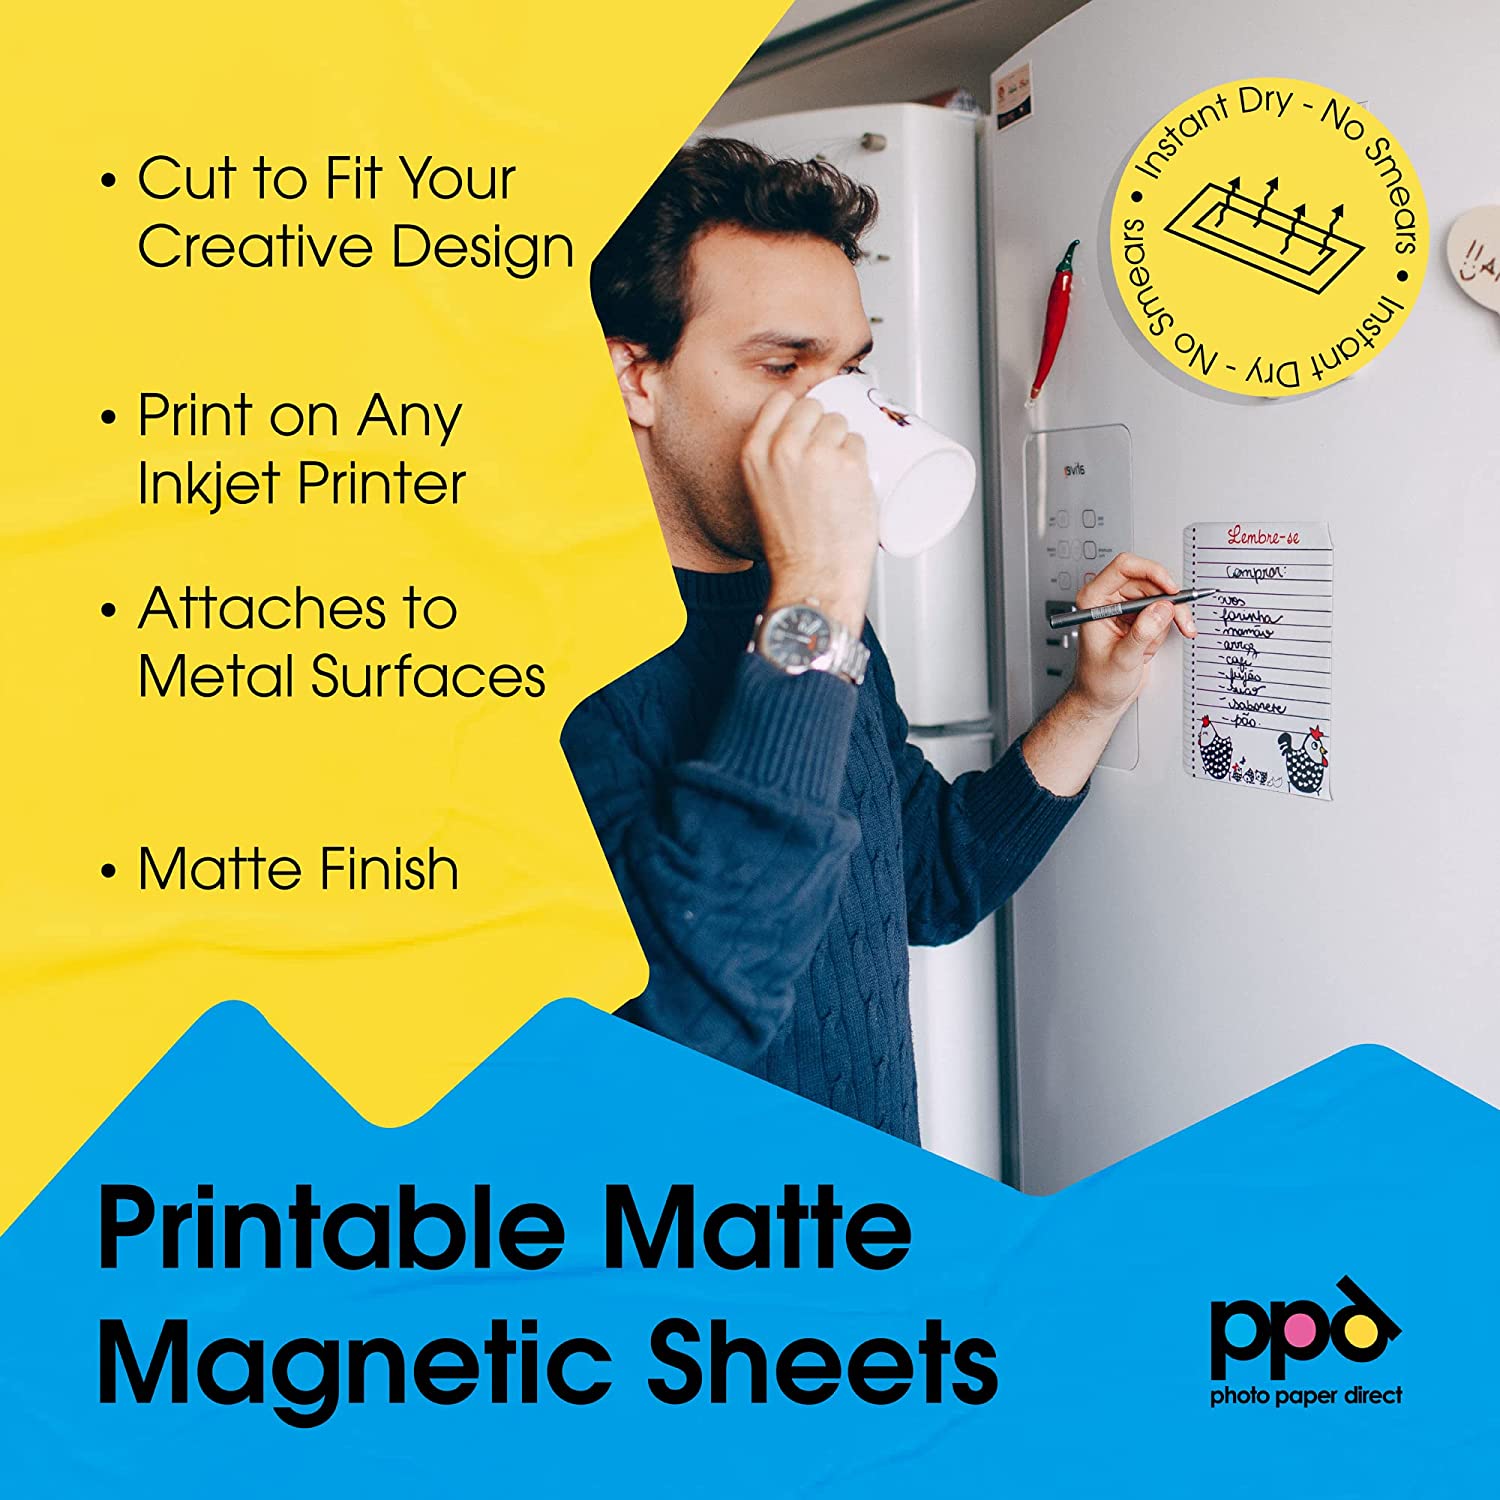 PPD 10 Sheets Printable Inkjet Magnetic Sheets Glossy Finish Premium 13mil Thick Photo Paper Quality, Instant Dry and Water-Resistant 8.5x11 (PPD-31